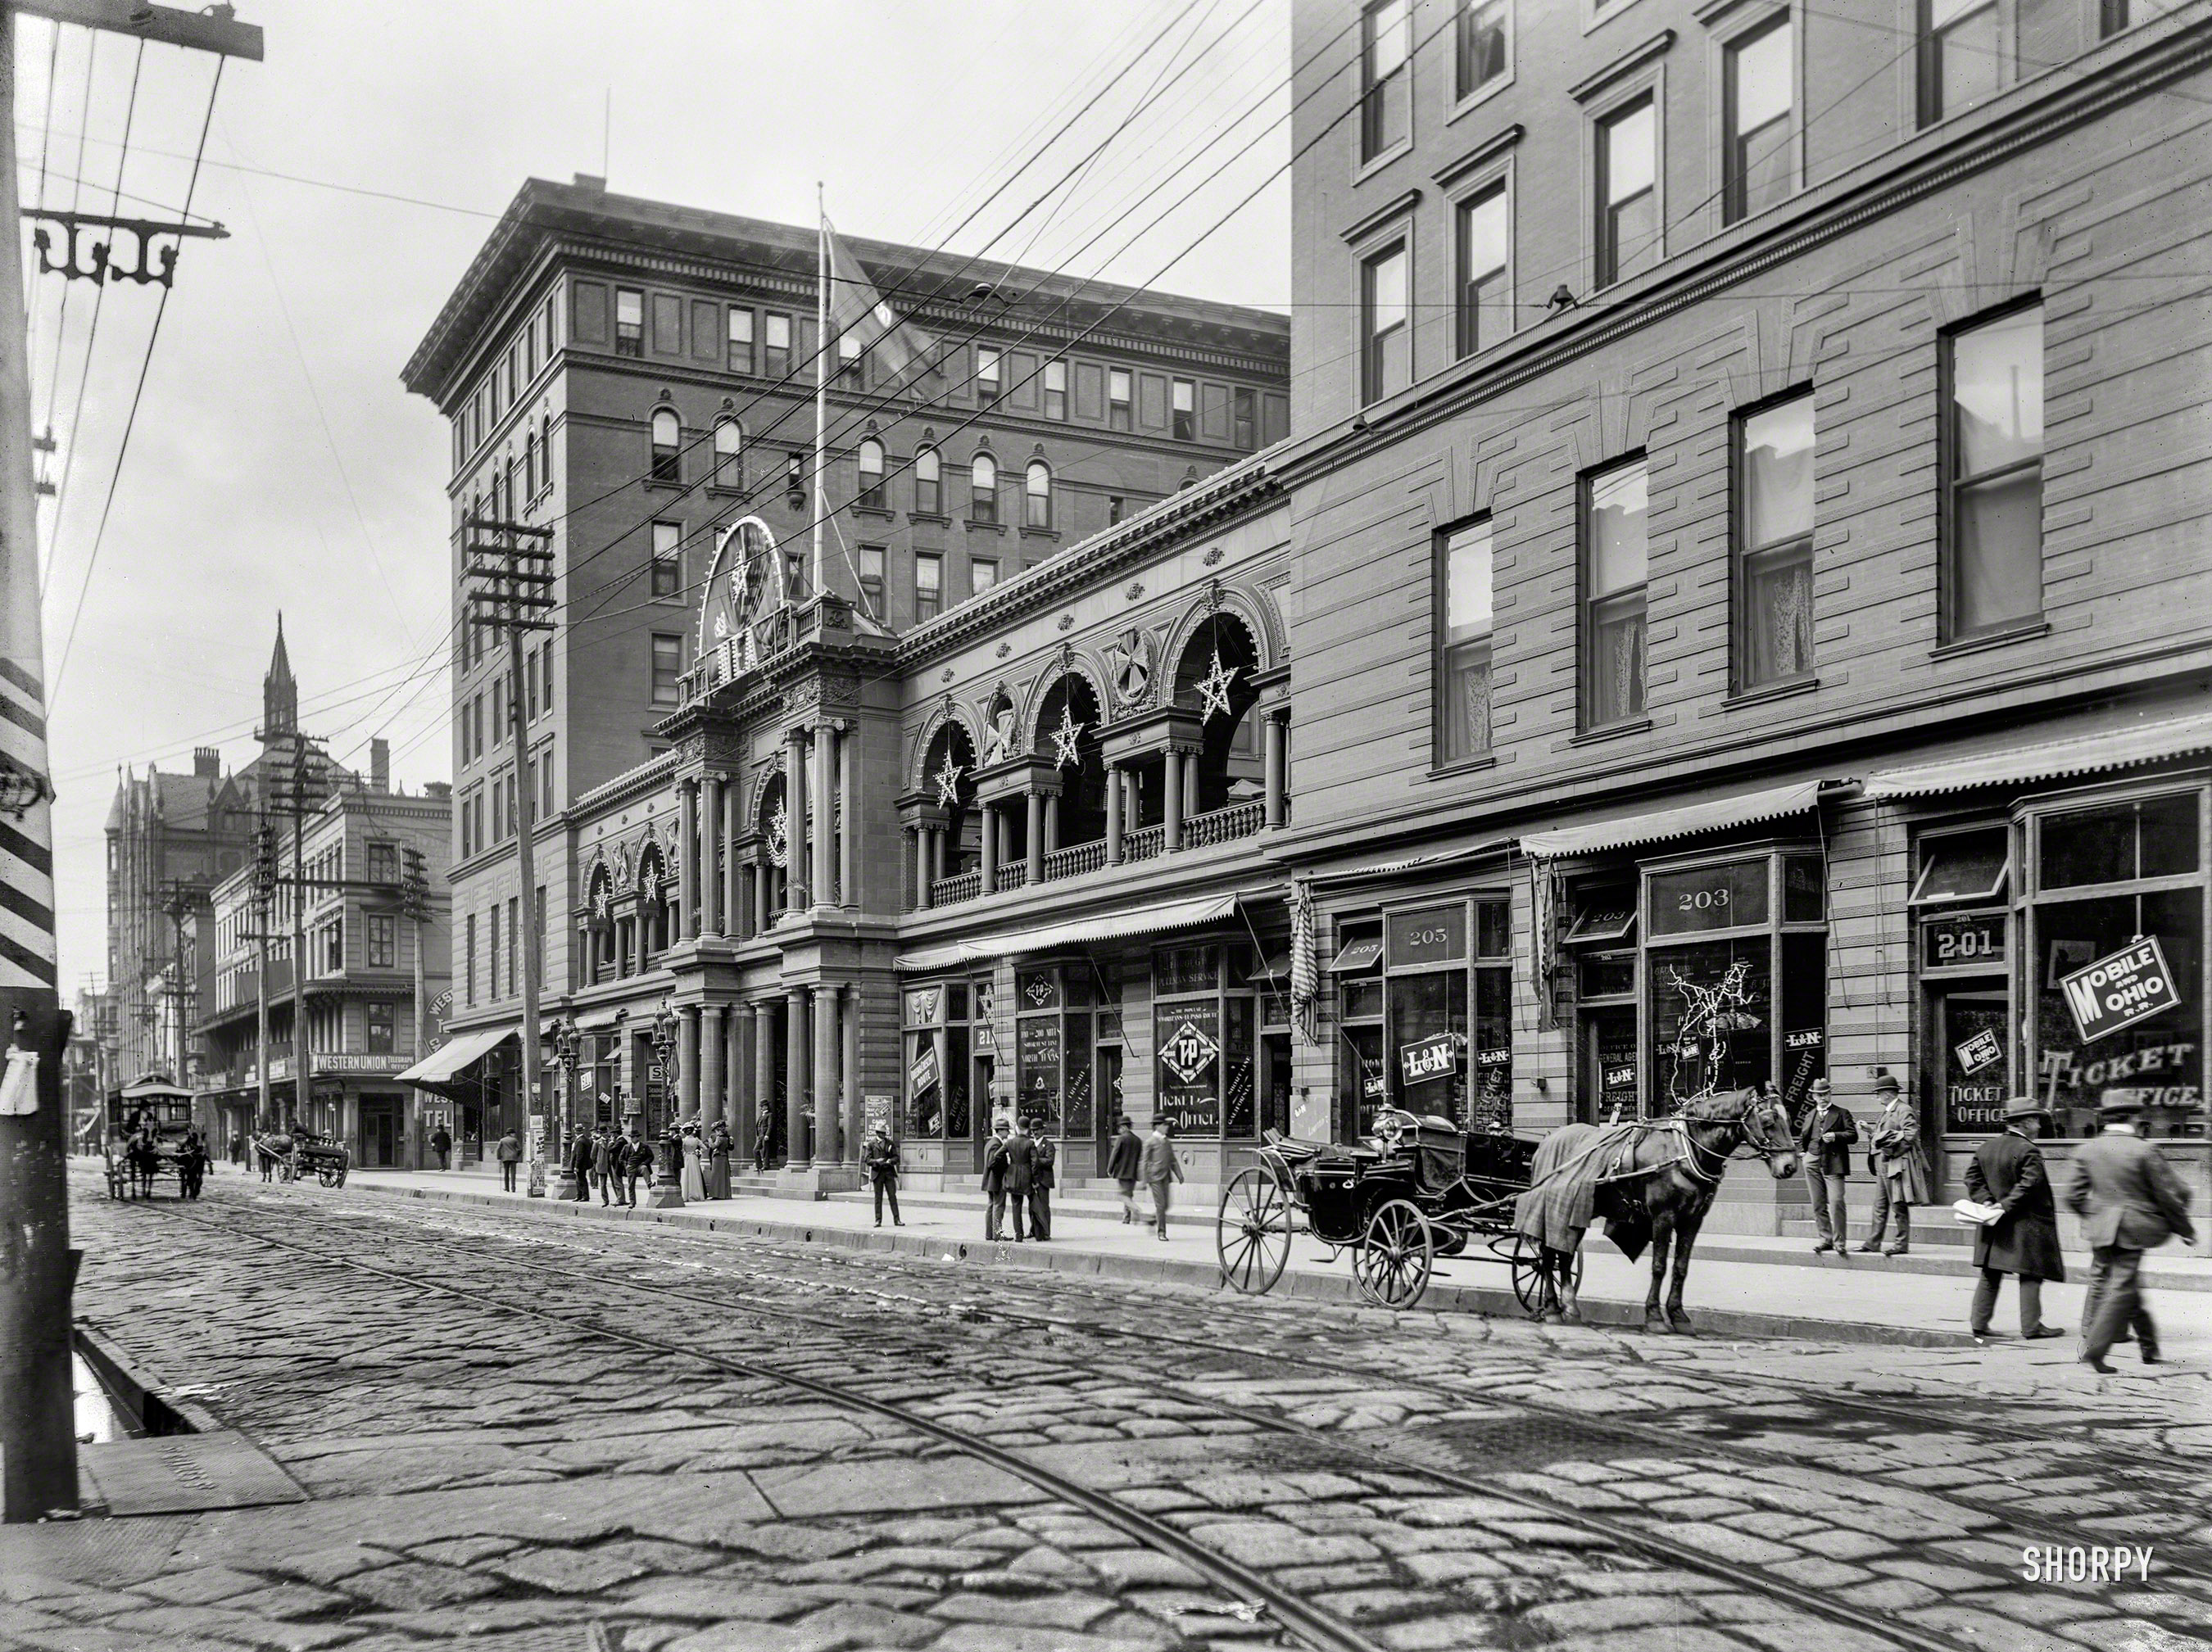 New Orleans circa 1900. "St. Charles Hotel, St. Charles Street." Welcome NEA members! 8x10 inch glass negative, Detroit Publishing Company. View full size.